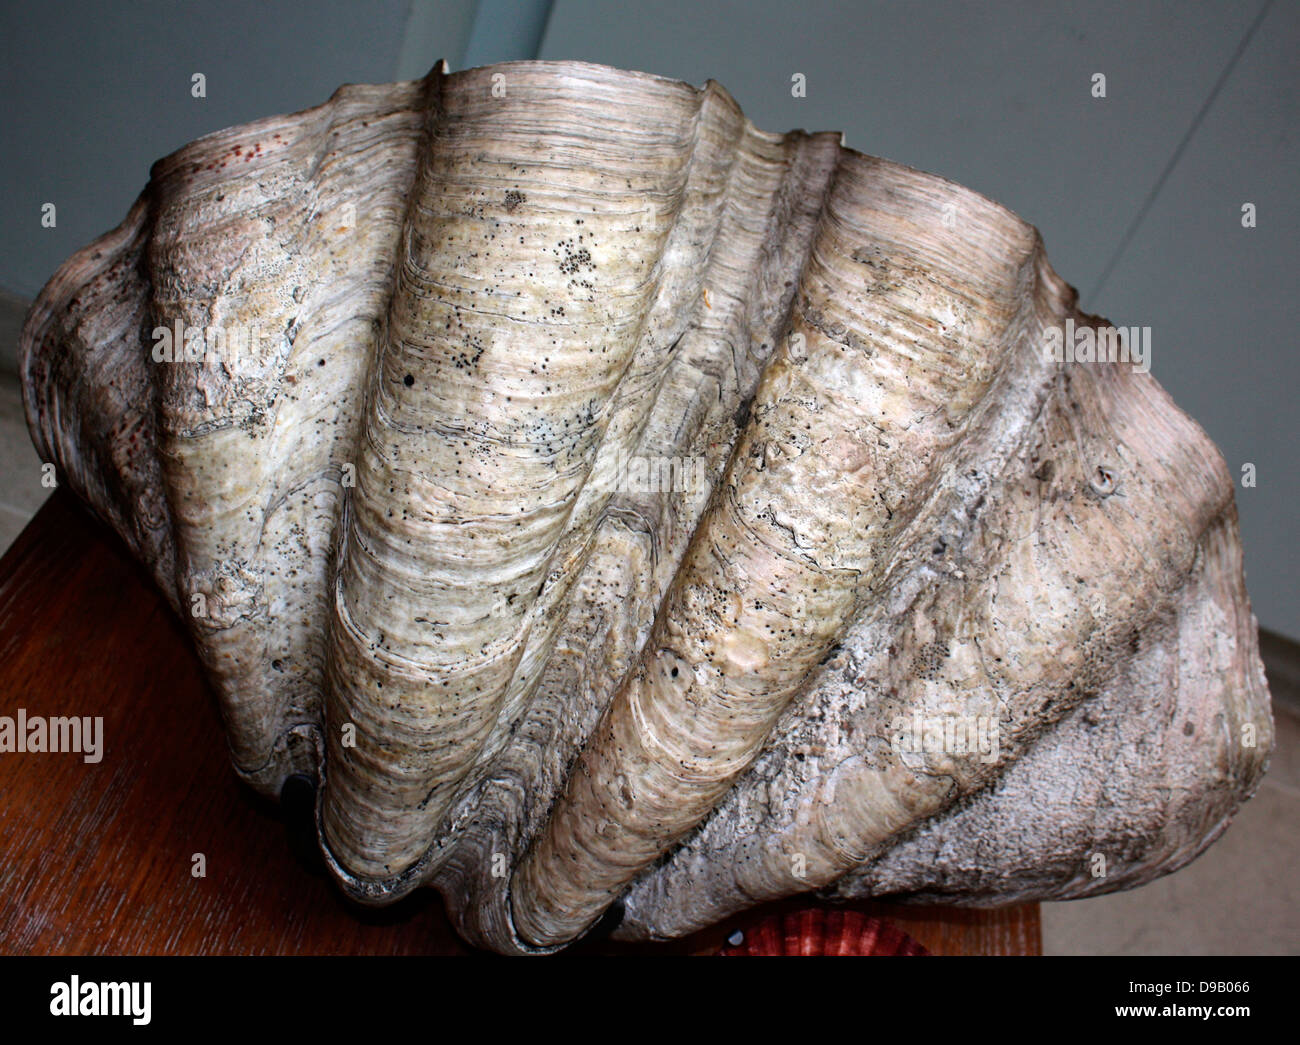 The Mollusc shell is typically an exoskeleton which encloses the animal in the Mollusca, which includes snails, clams, tusk shells and several other classes.  The shells in some mollusc show in bands e.g. seasons, tides, bad winters and pollution. Stock Photo